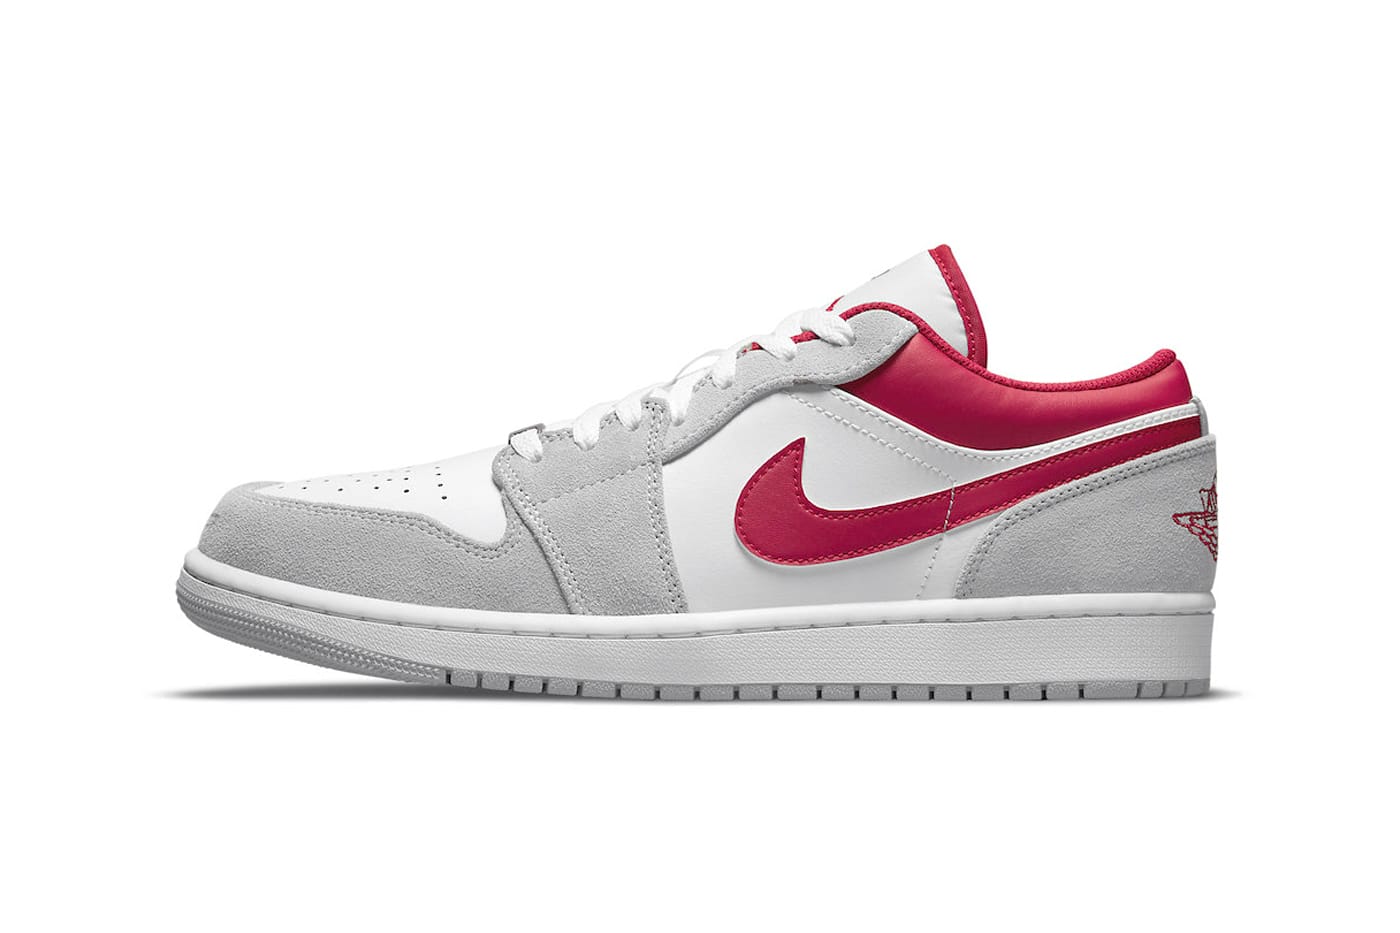 low top red and white jordan 1s